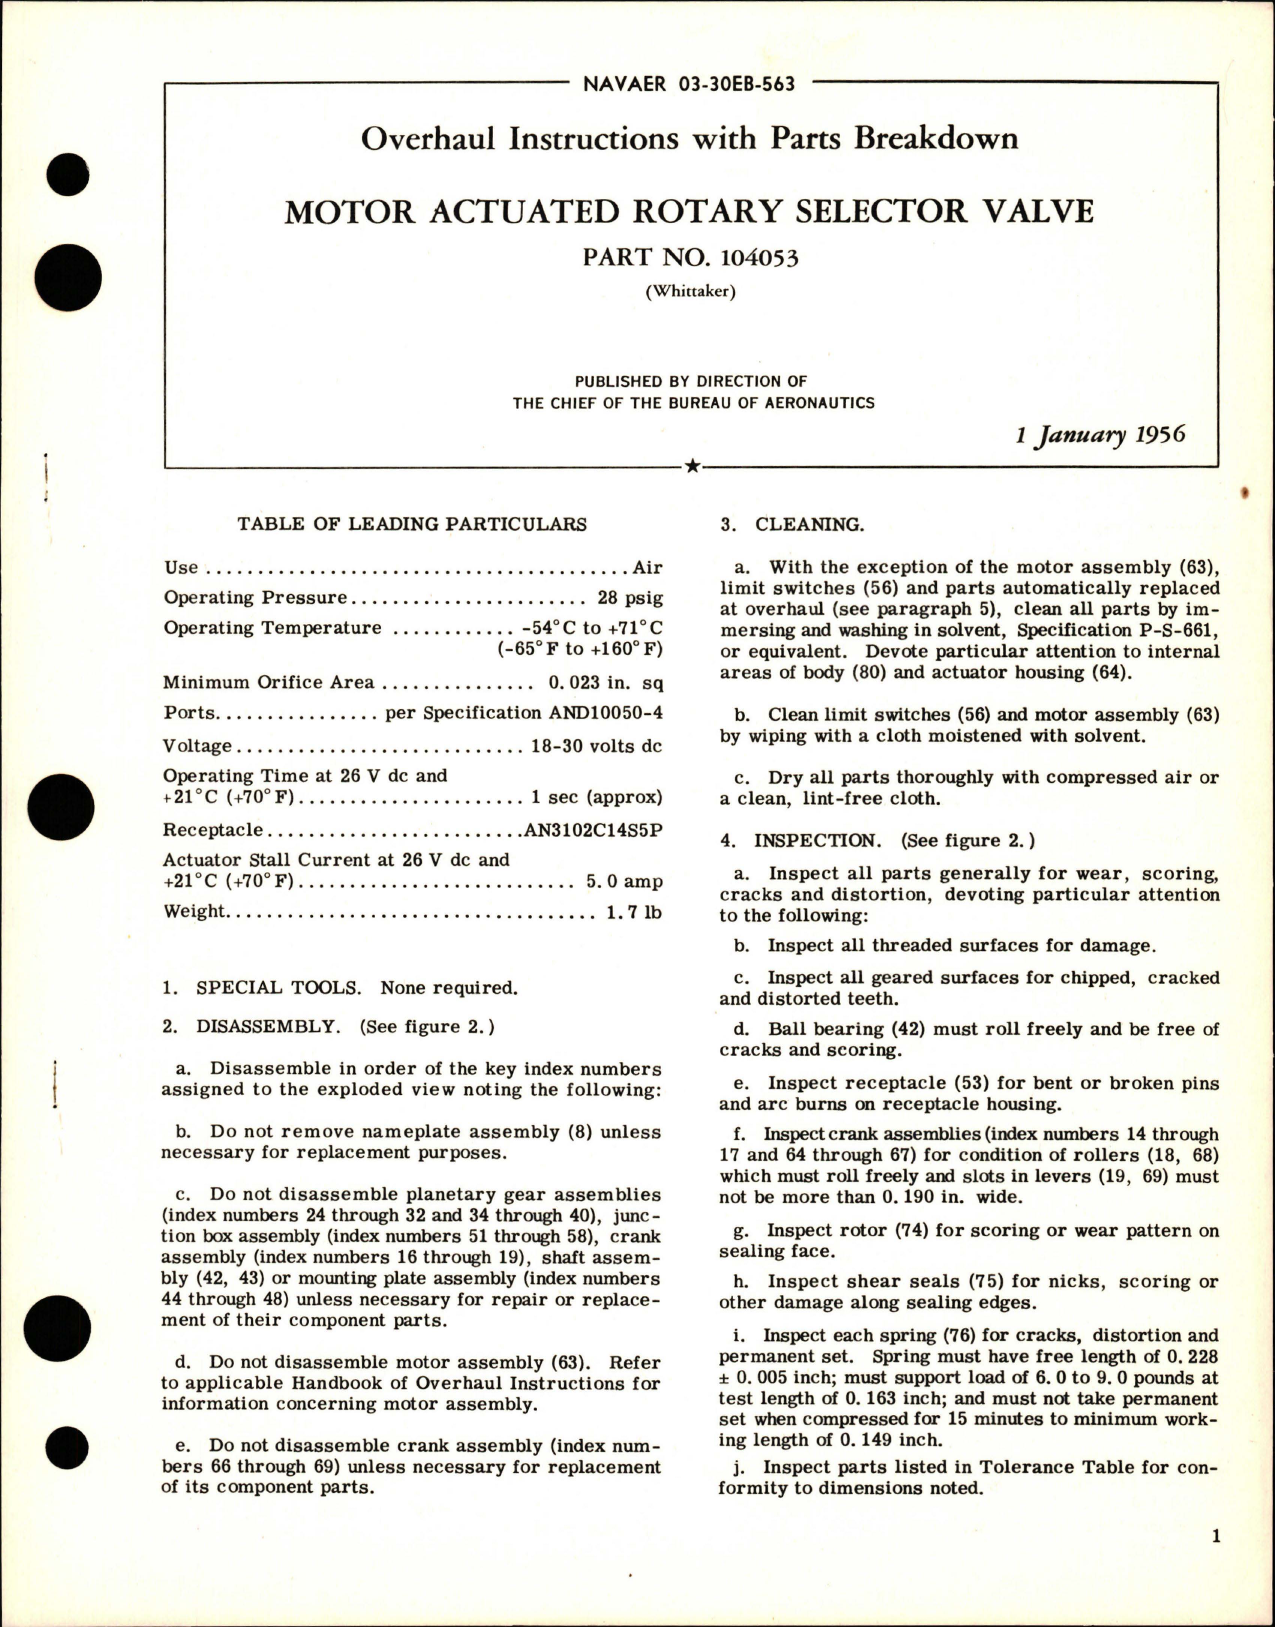 Sample page 1 from AirCorps Library document: Overhaul Instructions with Parts for Motor Actuated Rotary Selector Valve - Part 104053